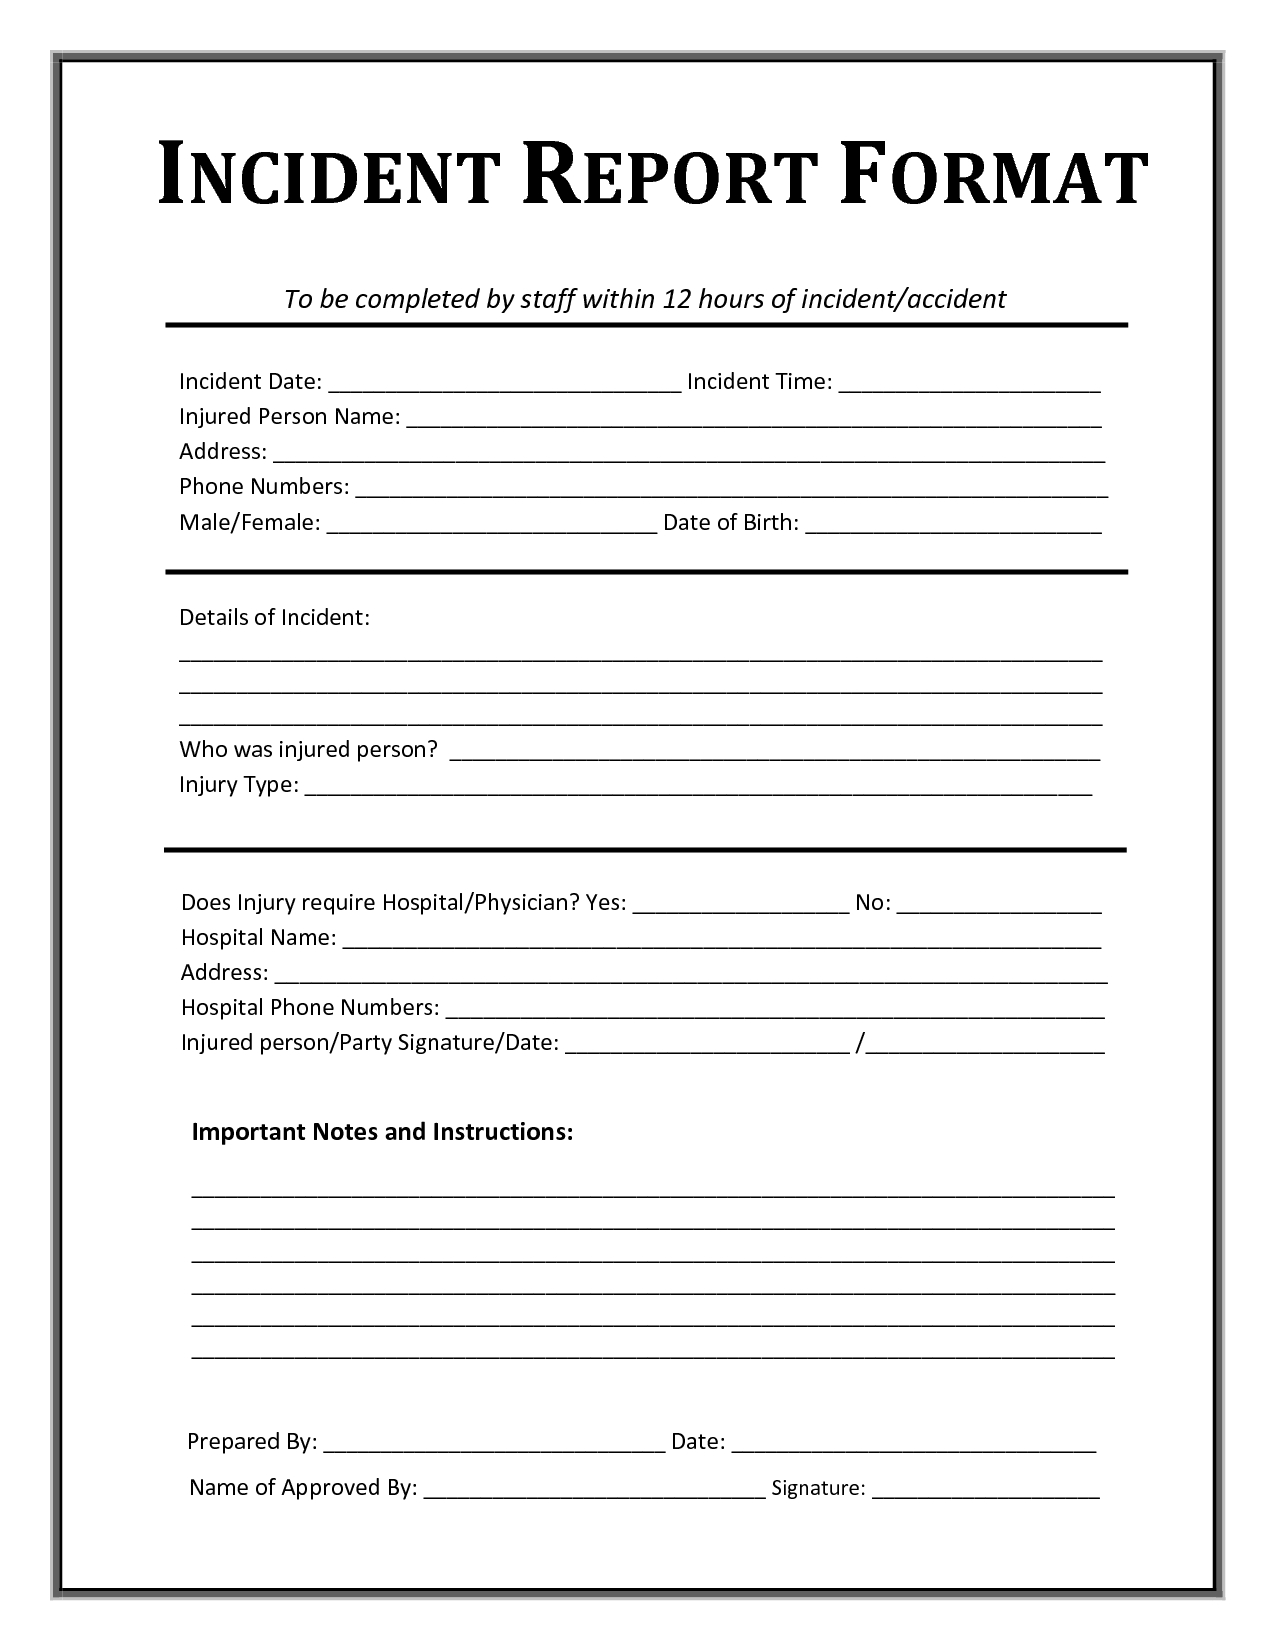 Incident Report Form Template Microsoft Excel  Report Templates pertaining to Injury Report Form Template